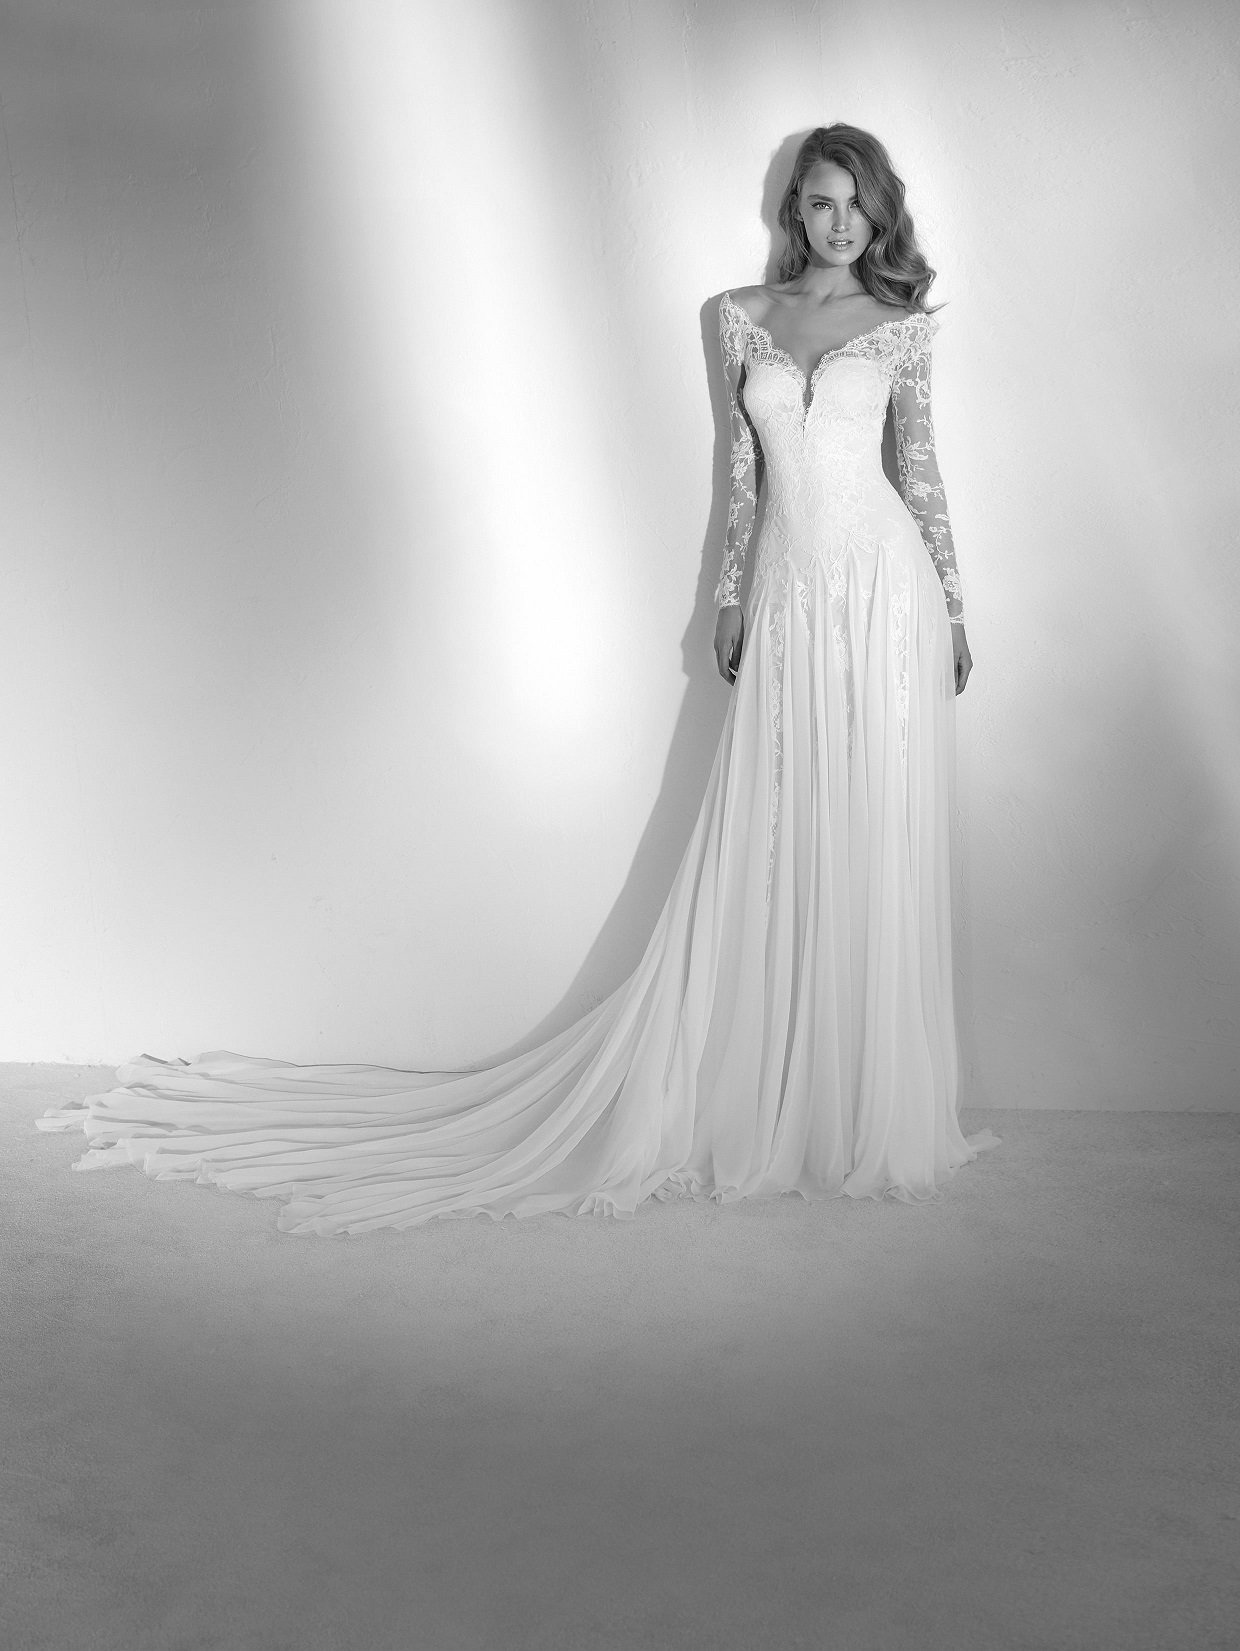 dreamy-wedding-gown-with-an-off-the-shoulder-neckline-modes-bridal-nz